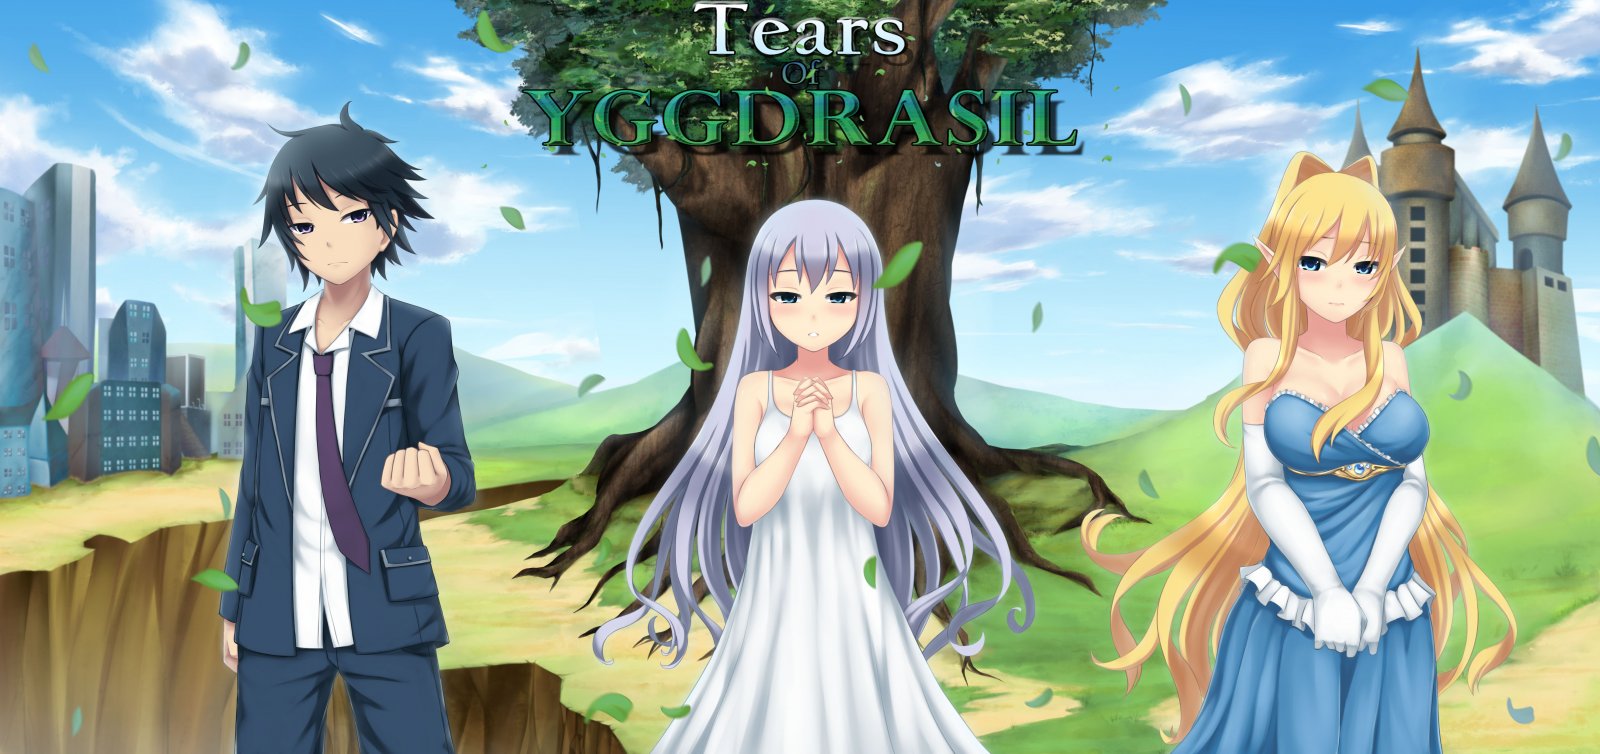 Tears Of Yggdrasi Completed by Moonstar English